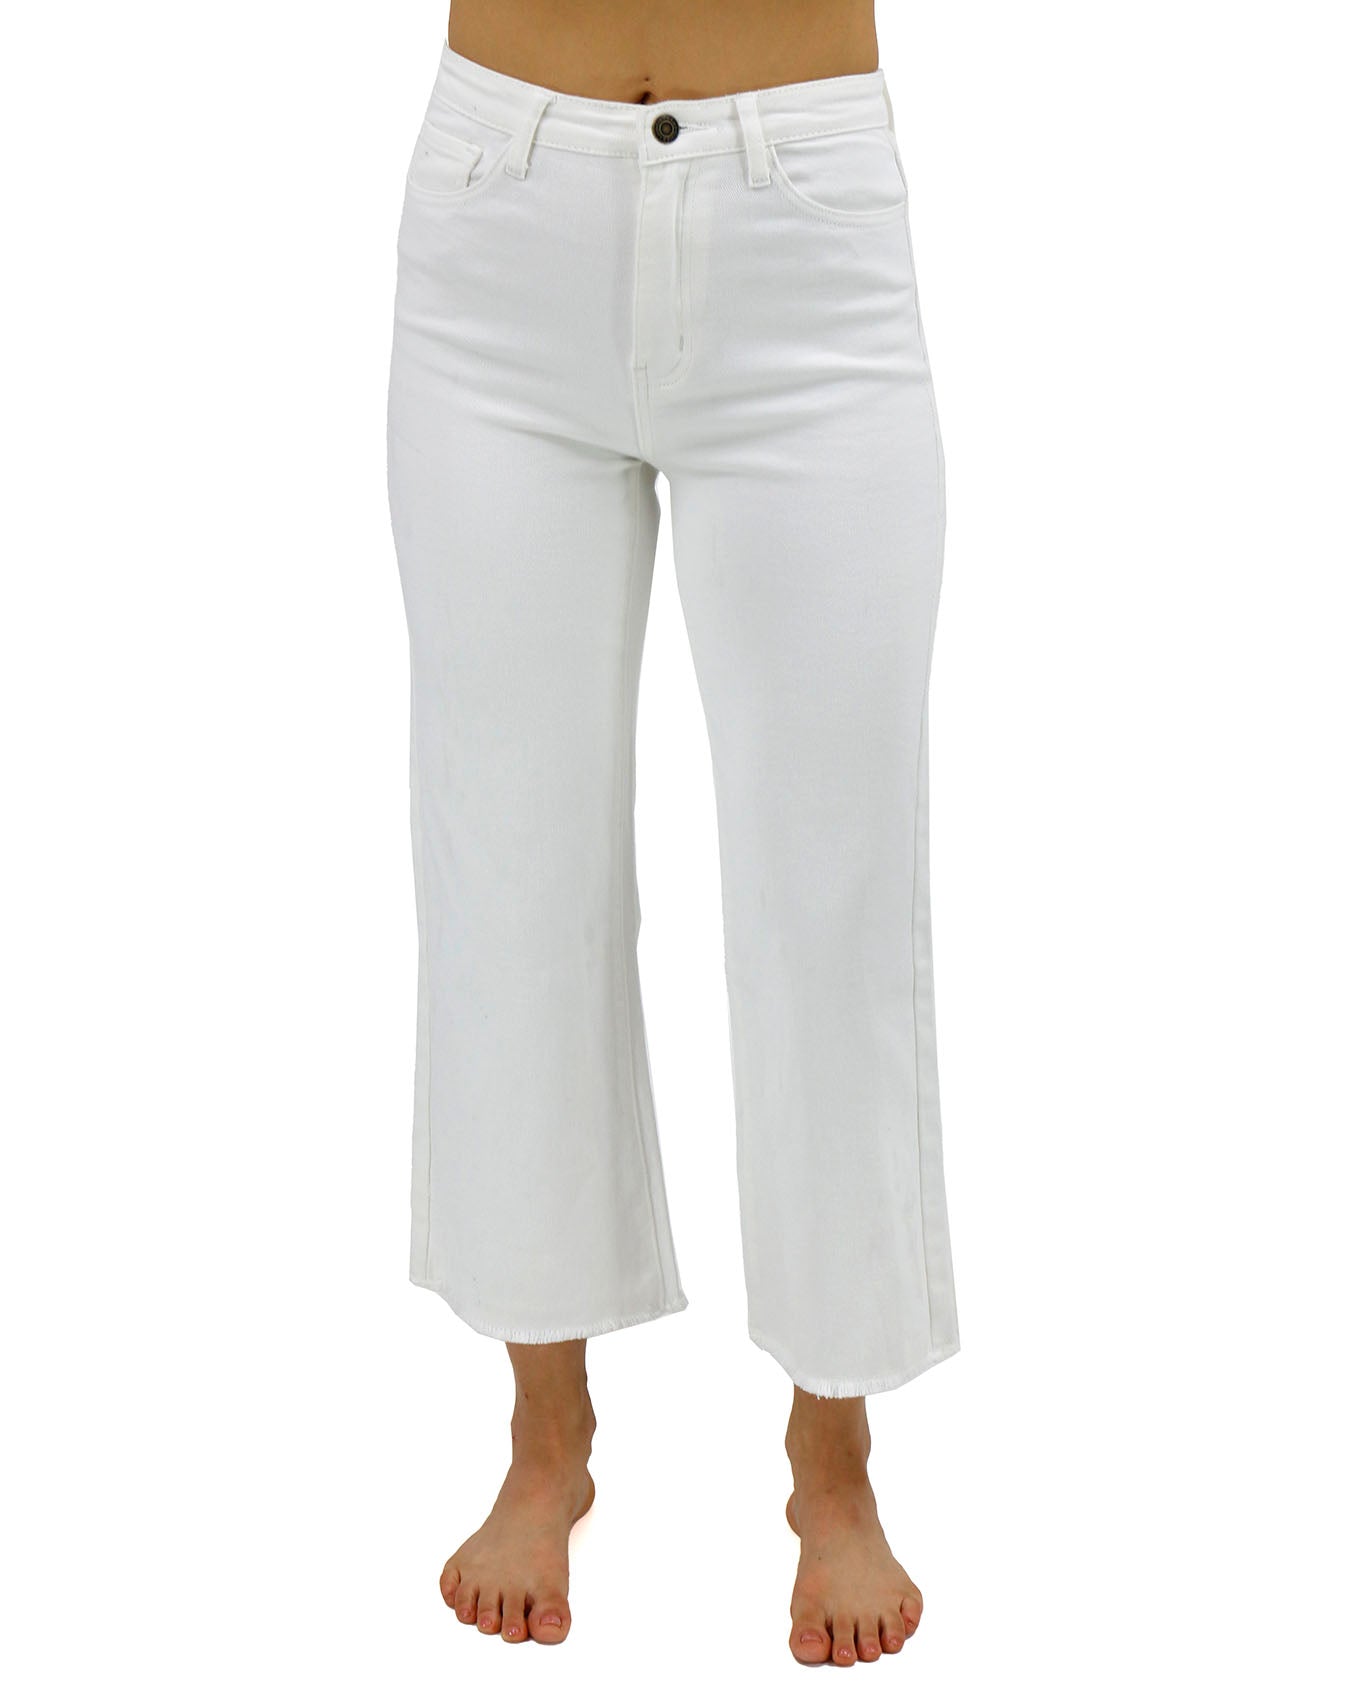 Front stock shot of Cropped White Wide Leg Denim